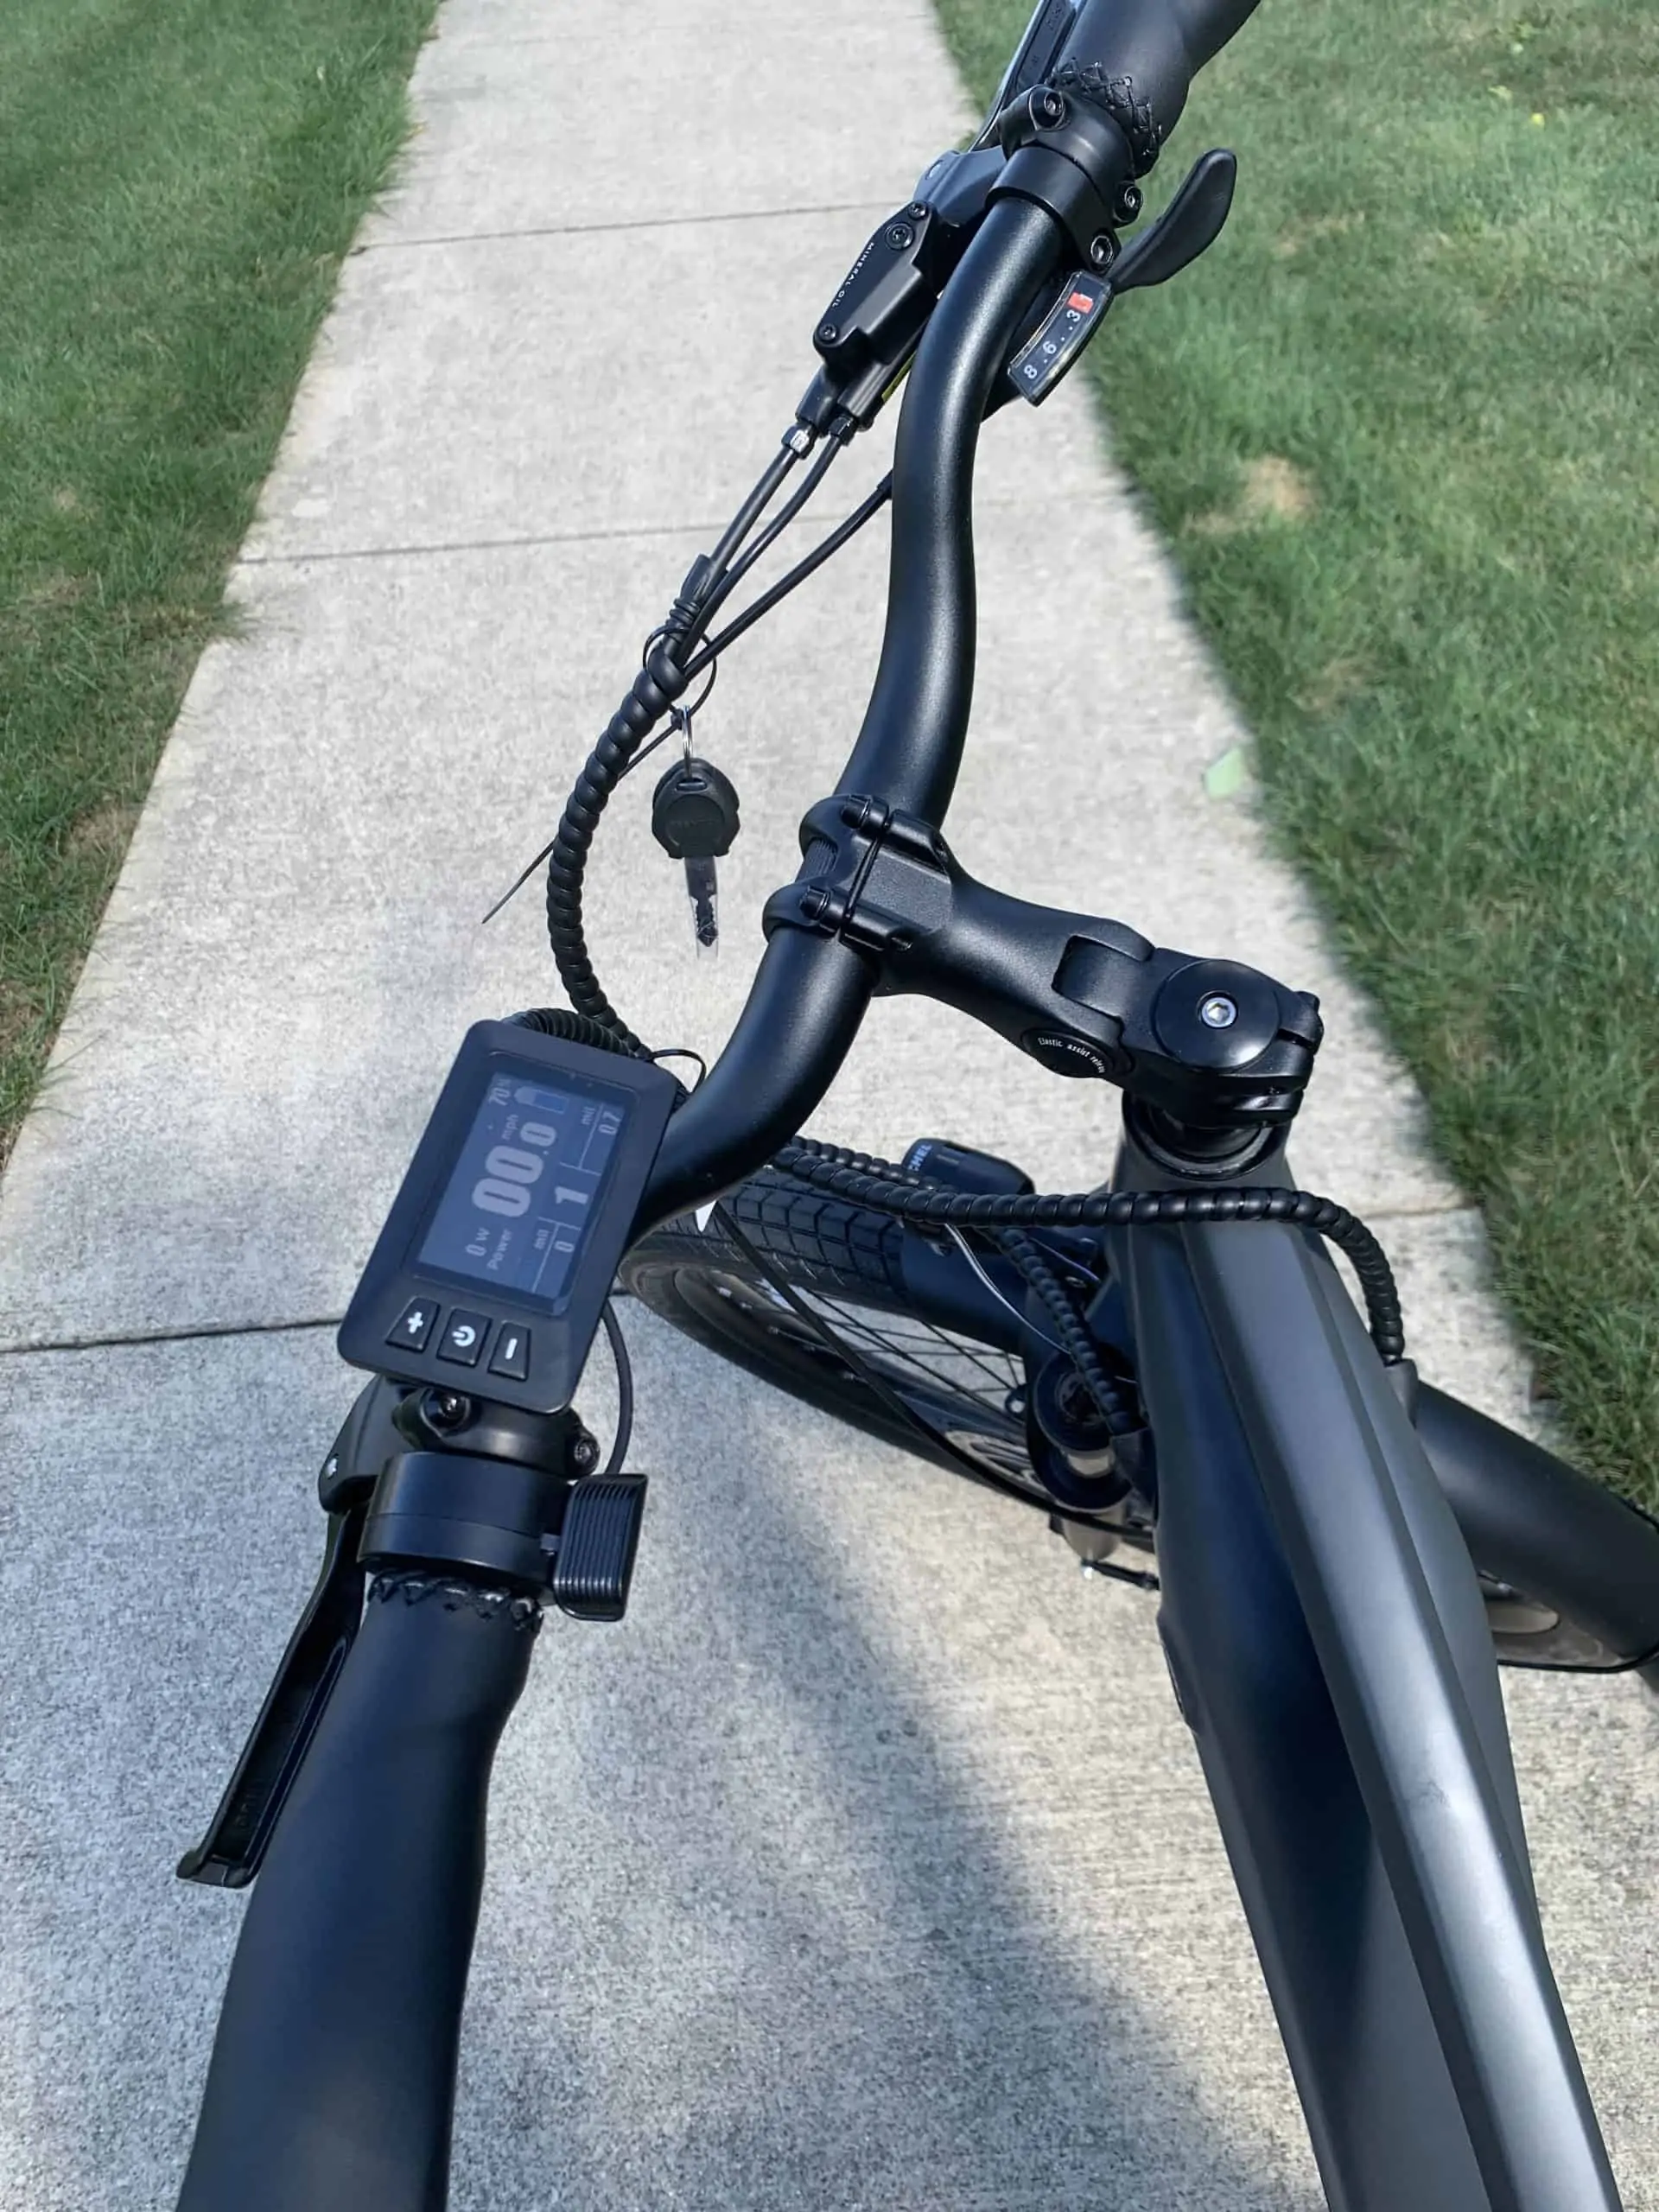 Ride1Up 700 SERIES Ebike Review – Does it Check All The Boxes on Our List? 1